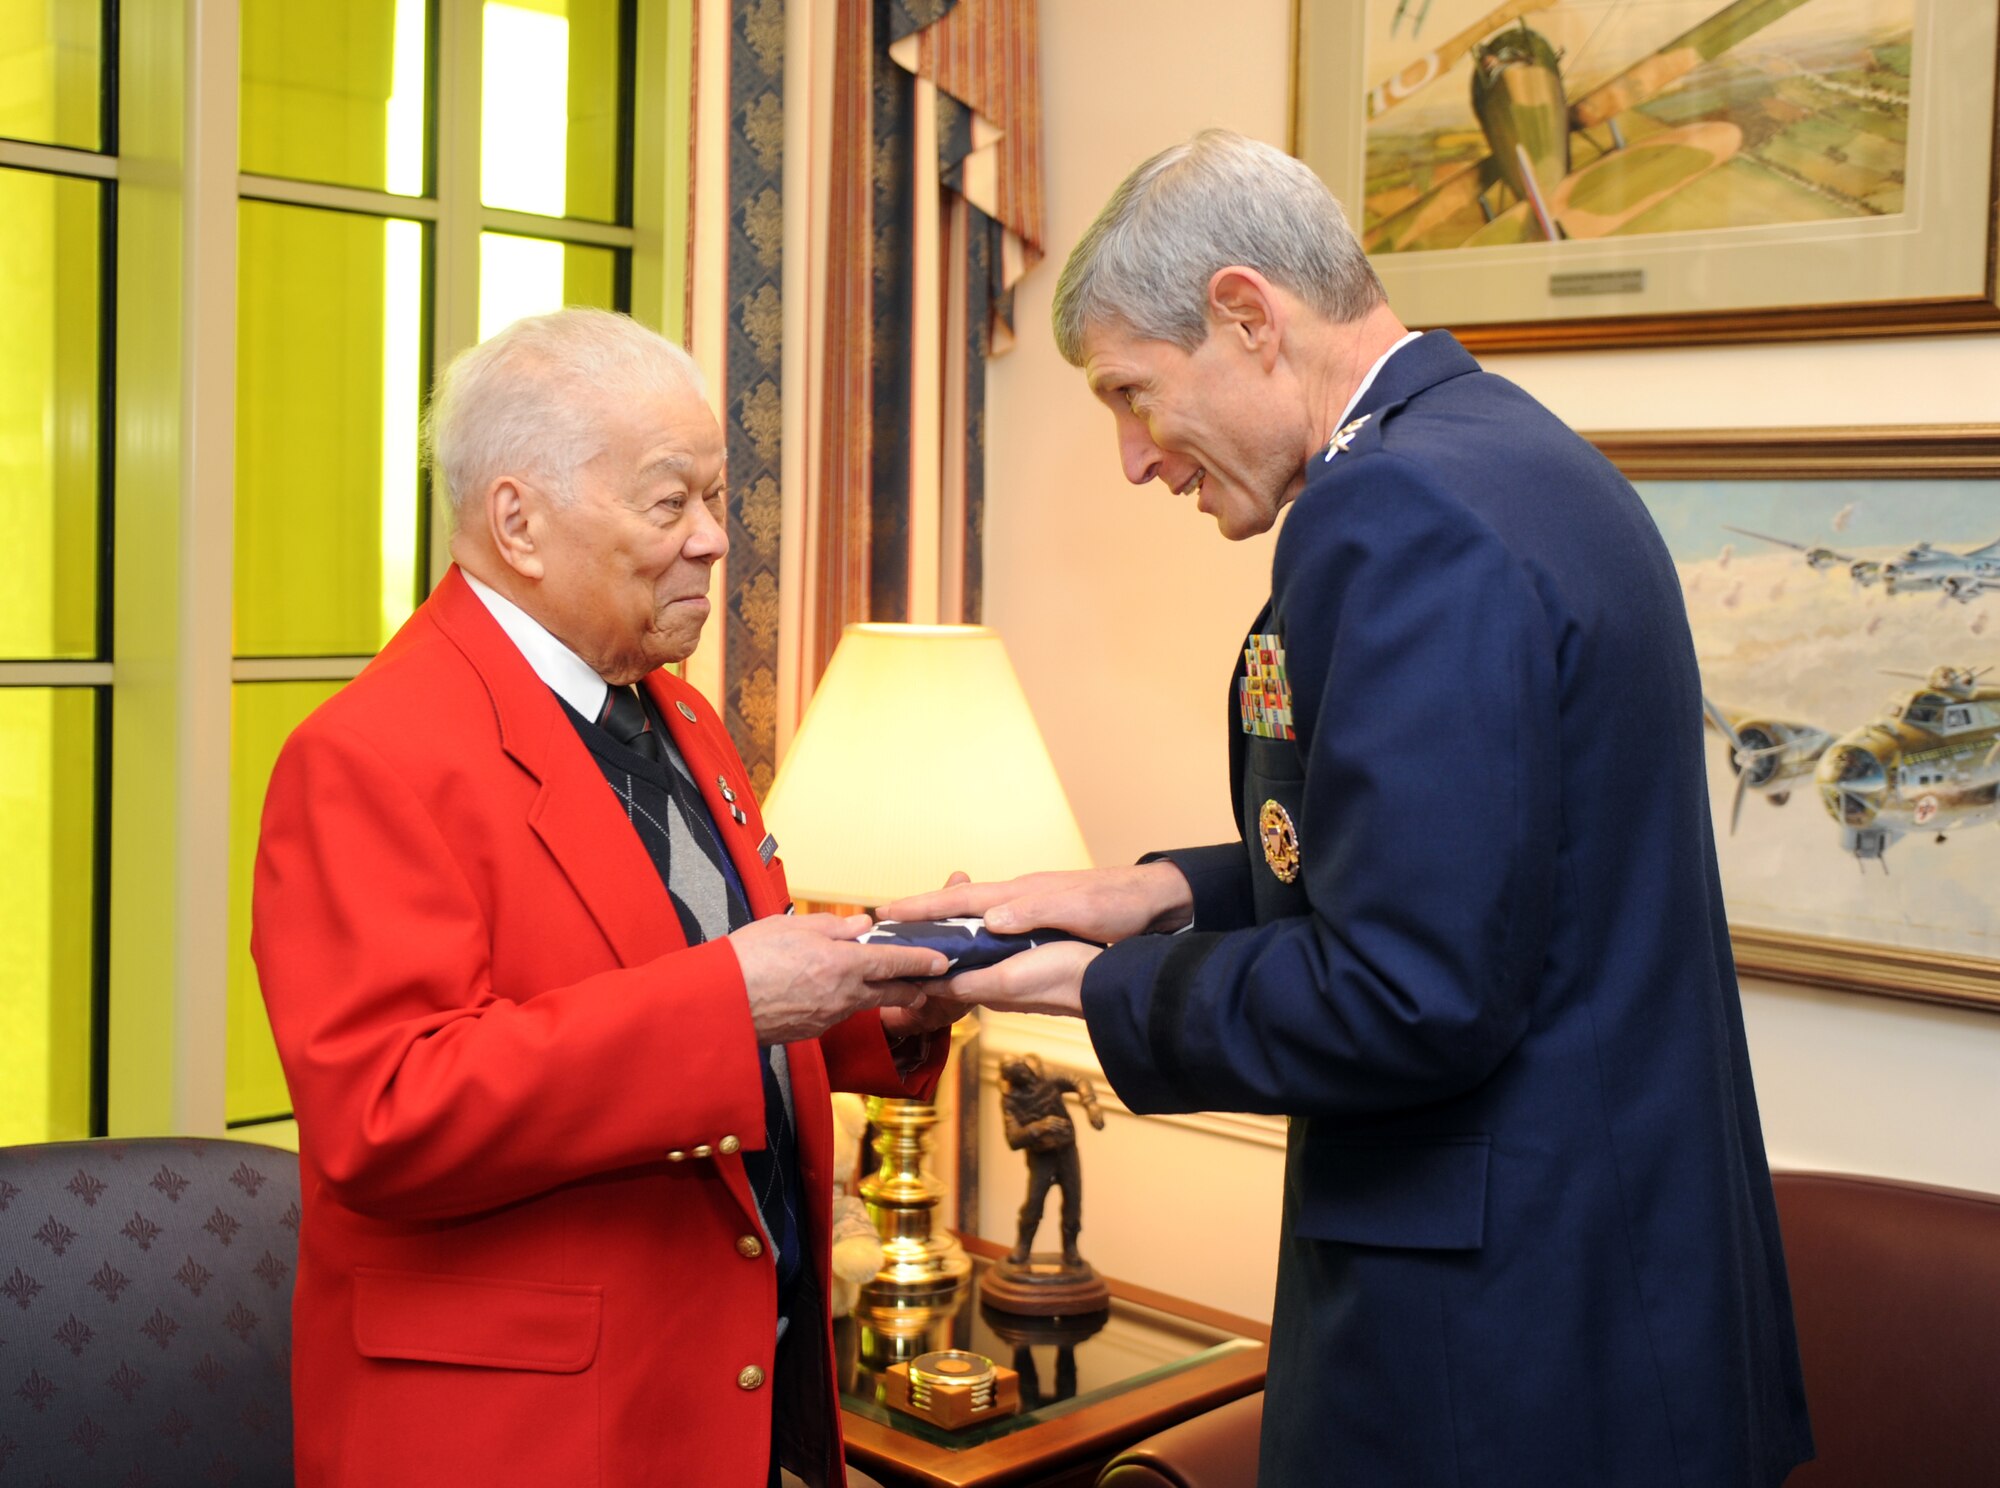 Air Force Chief of Staff Gen. Norton Schwartz presents an American flag that was flown over the Pentagon to retired Lt. Col. Walter McCreary on March 16, 2012. Schwartz hosted McCreary, an original Tuskegee Airman, for an office call.  (U.S. Air Force photo/ Andy Morataya)